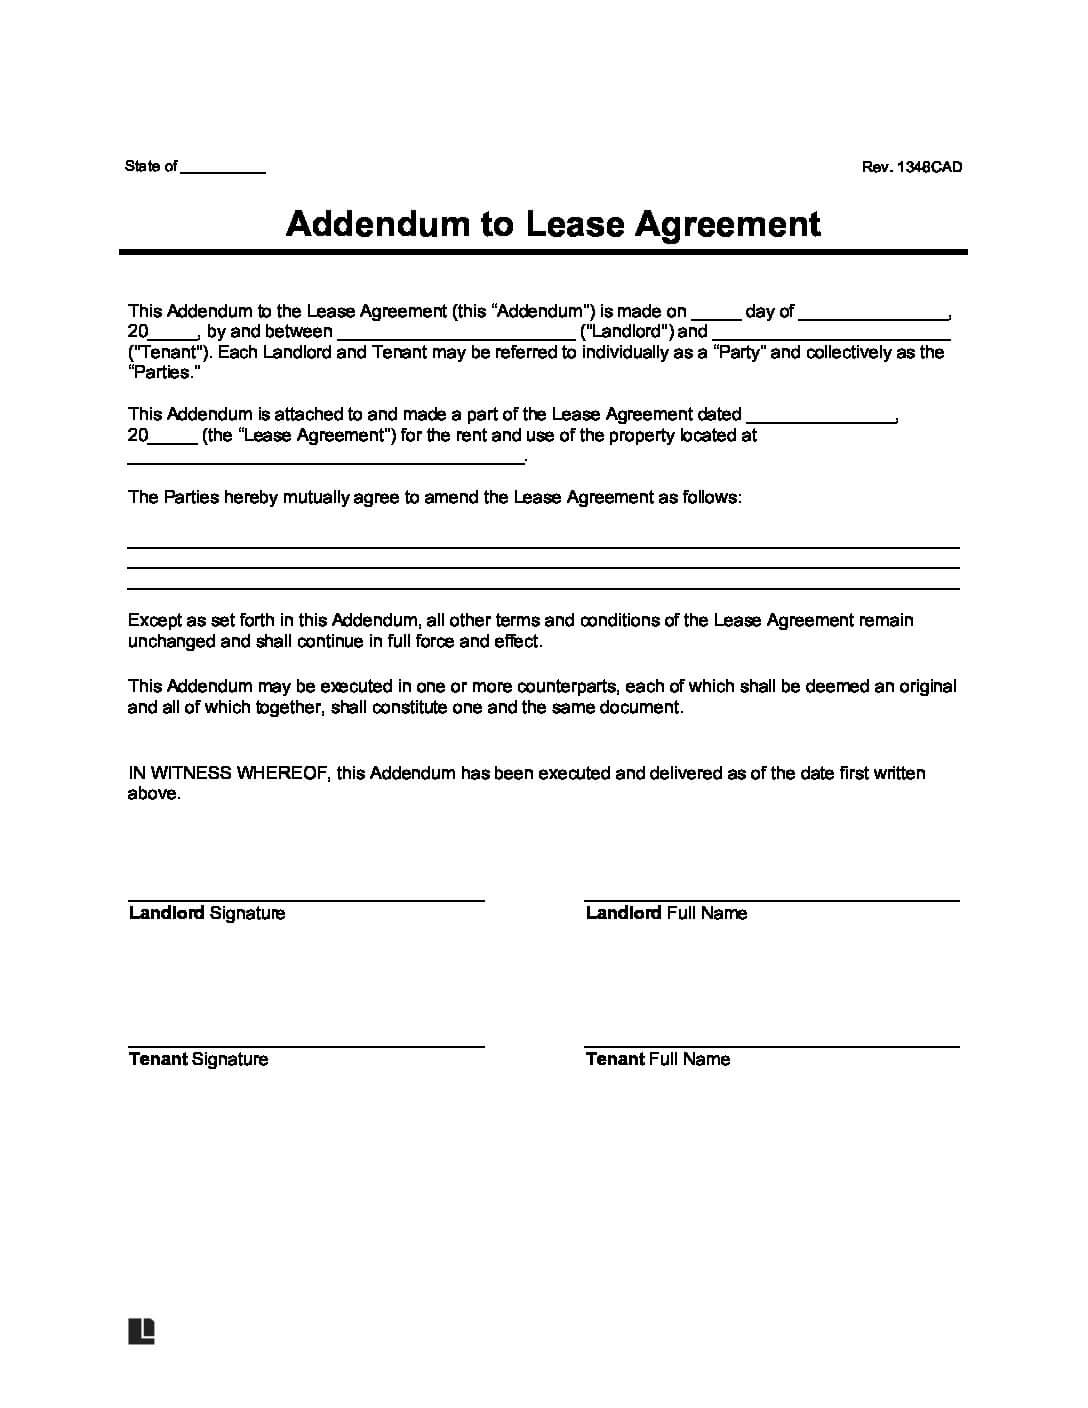 addendum to lease agreement template